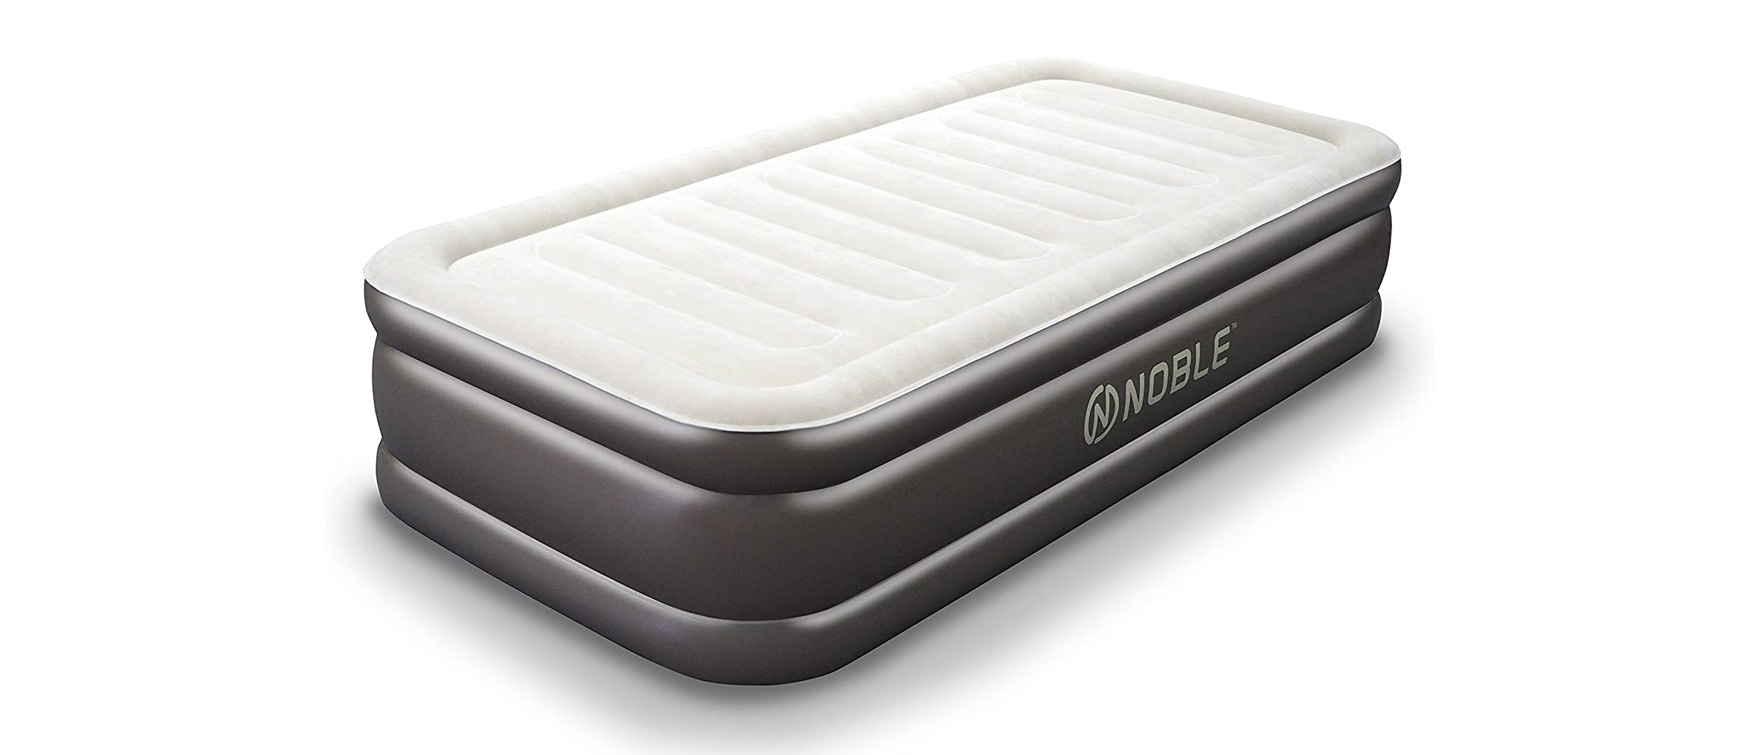 8. NOBLE INFLATABLE AIRBED